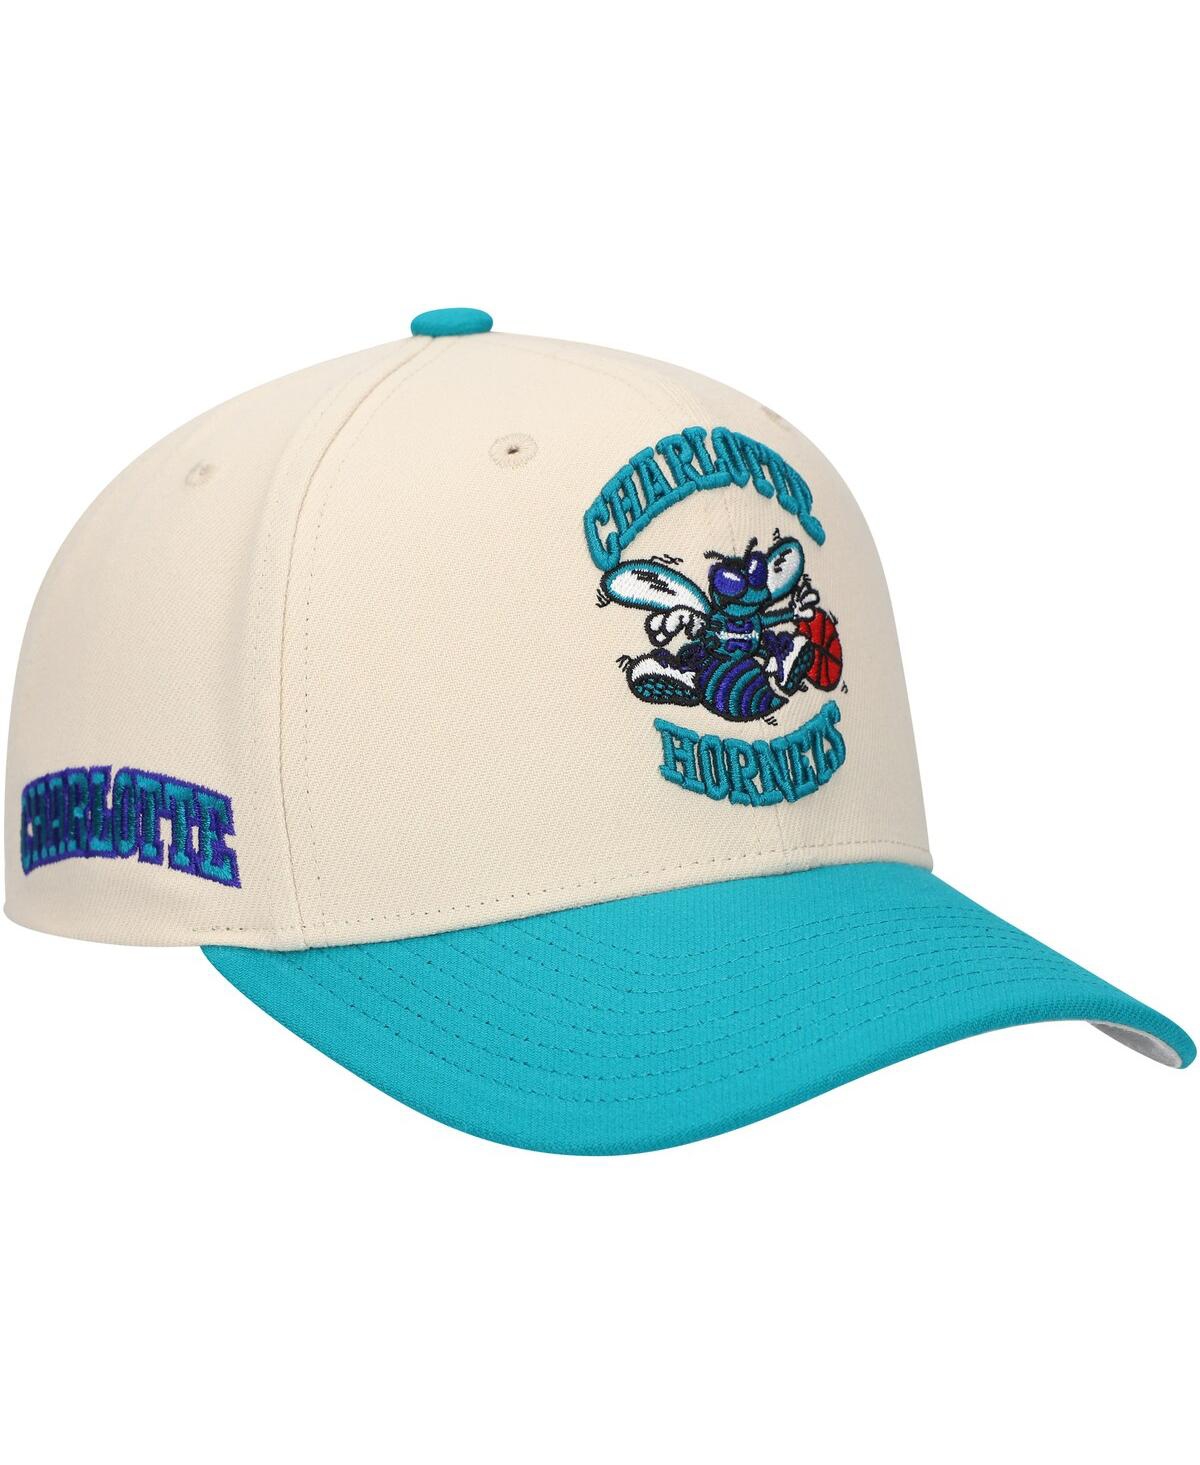 Mitchell & Ness Mitchell Ness Men's Cream Charlotte Hornets Game On Two-tone Pro Crown Adjustable Hat In White